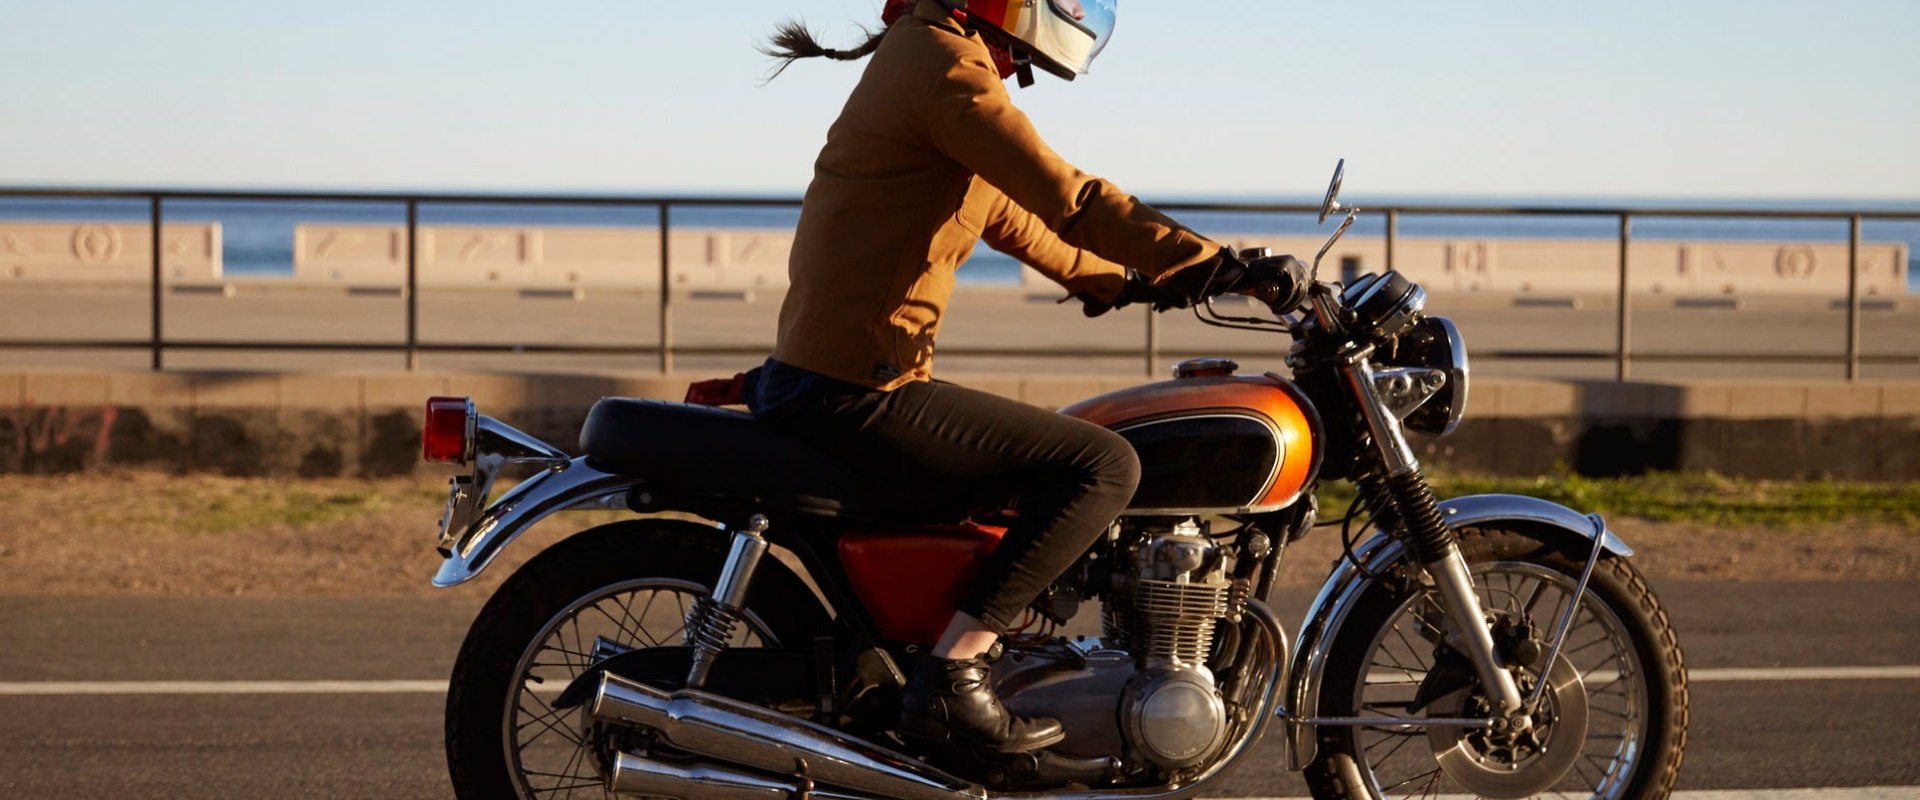 How Much Does Motorcycle Insurance Cost For A 16 Year Old In Florida?